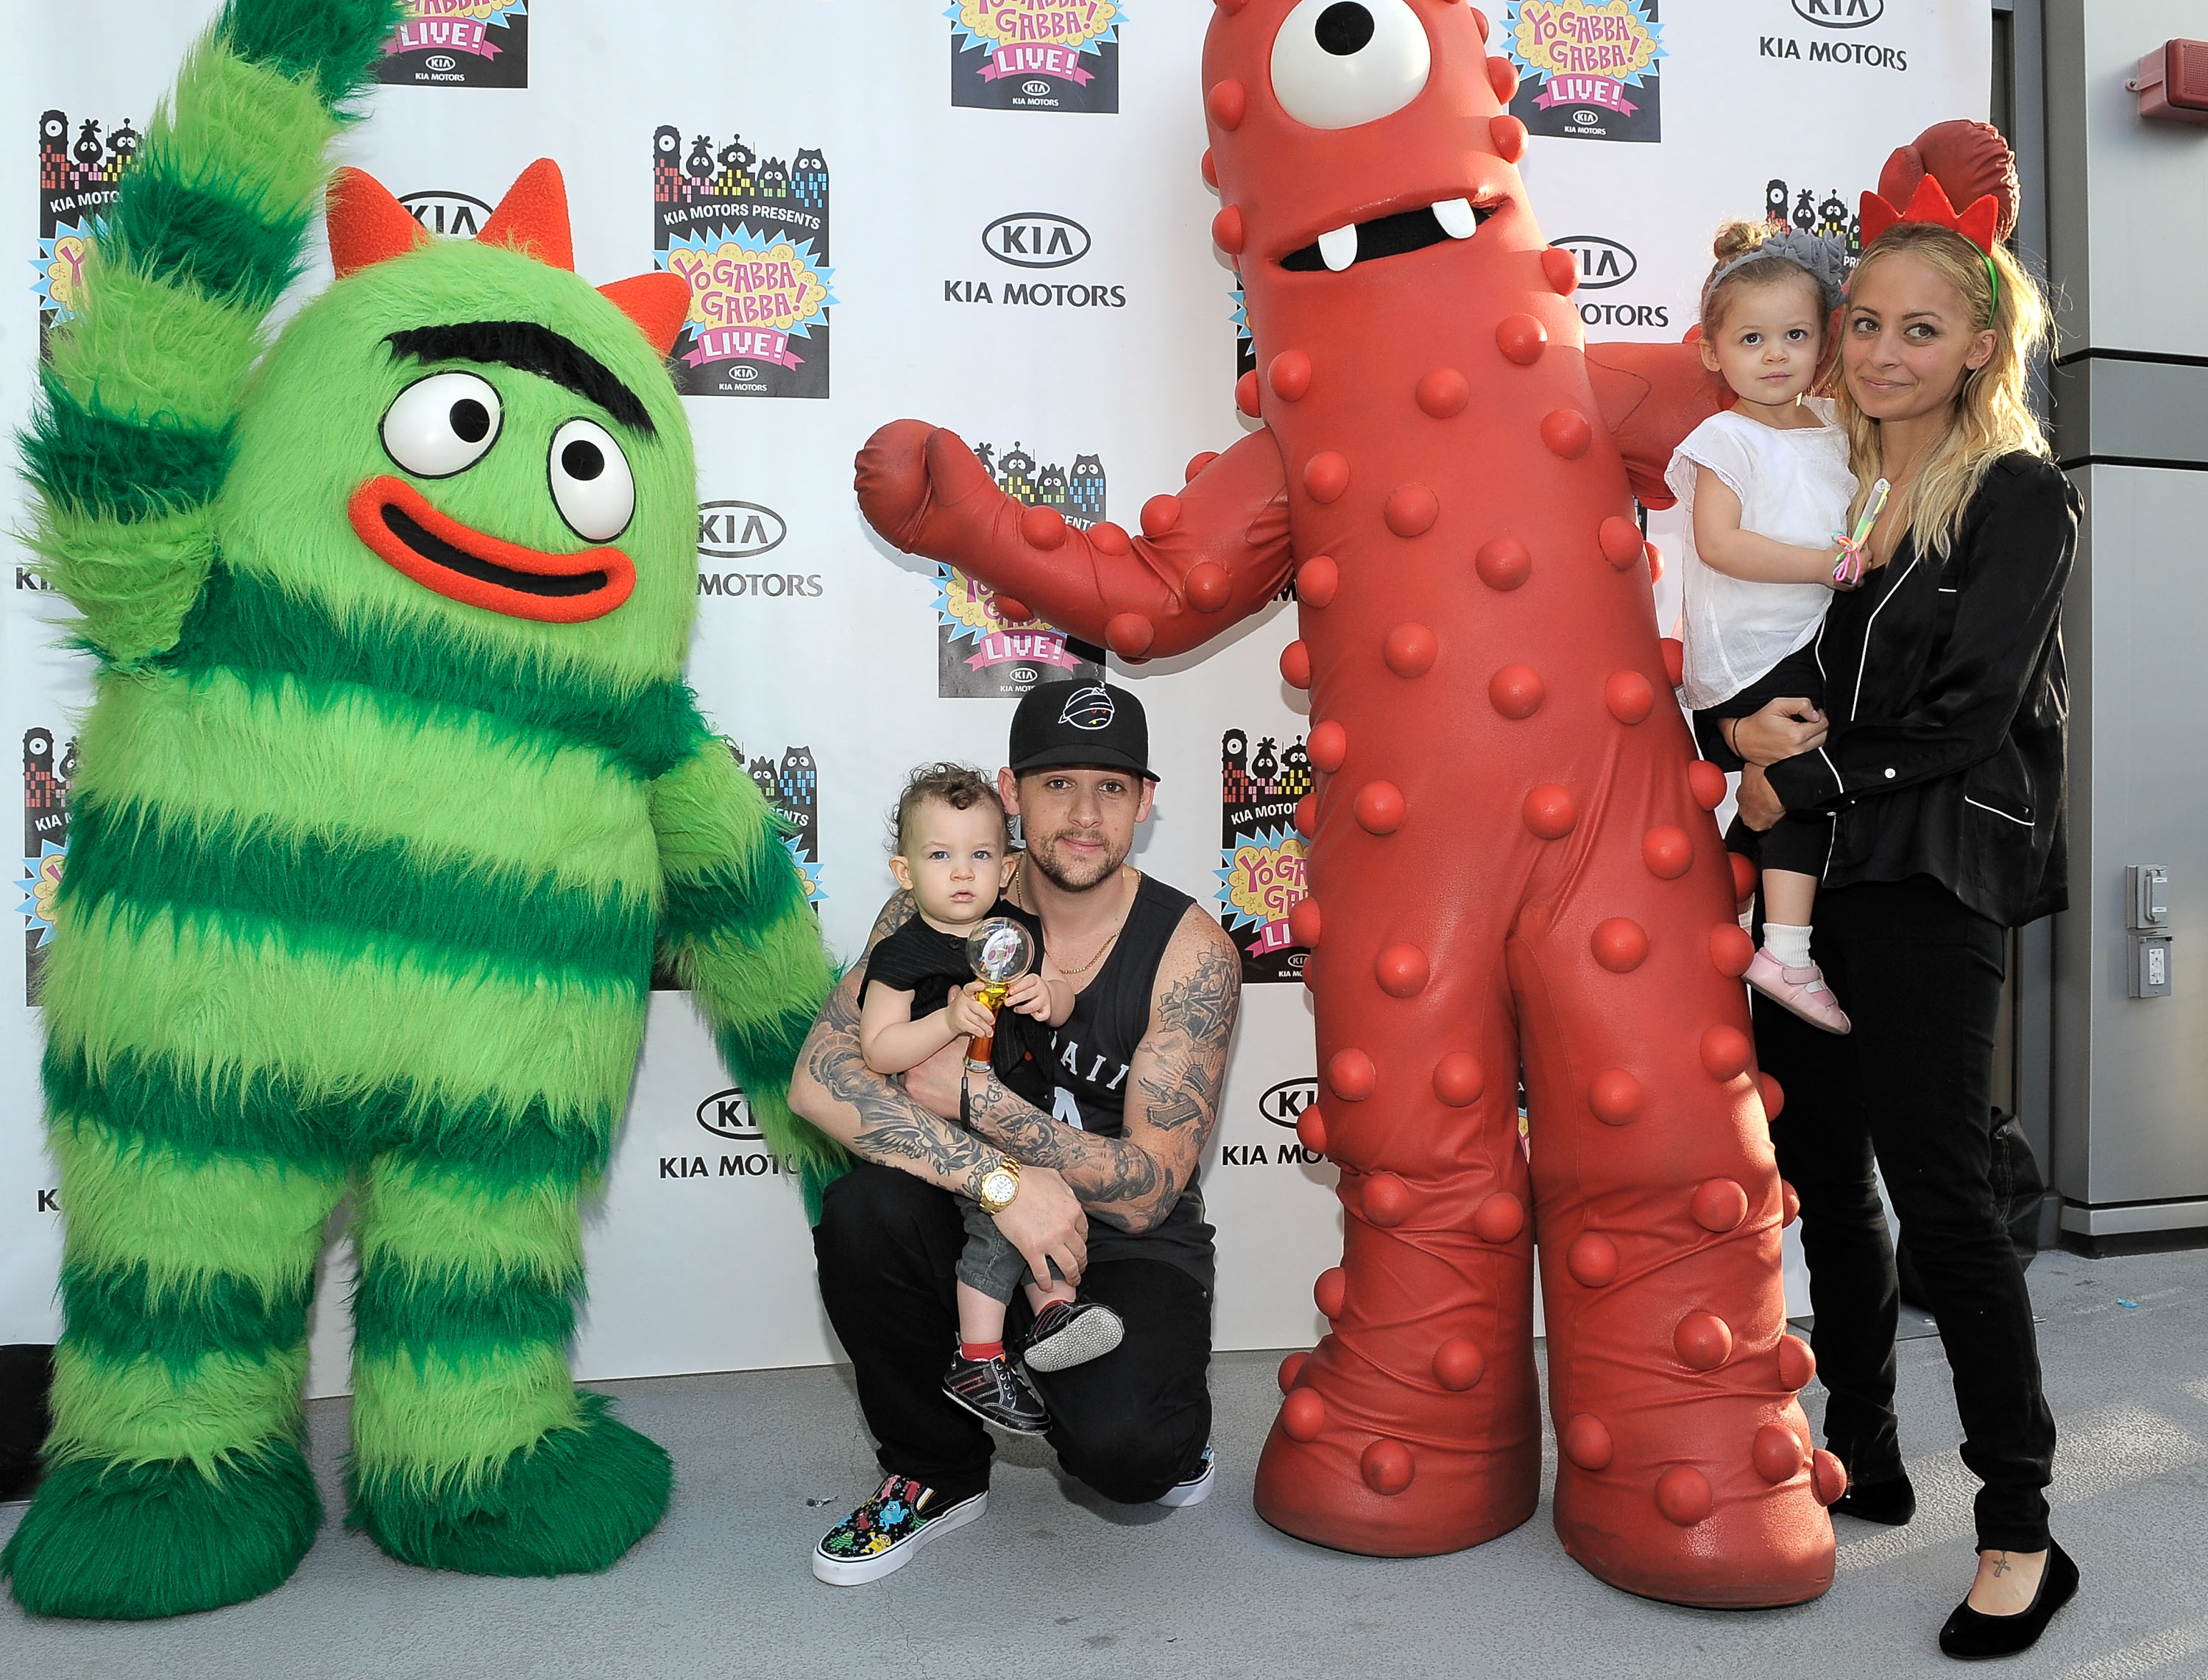 Sparrow Madden, Joel Maddem, Harlow Madden and Nicole Richie posing with "Yo Gabba Gabba!" characters at the "Yo Gabba Gabba!" Live! There's A Party In My City! event in Los Angeles, California on November 27, 2010 | Source: Getty Images